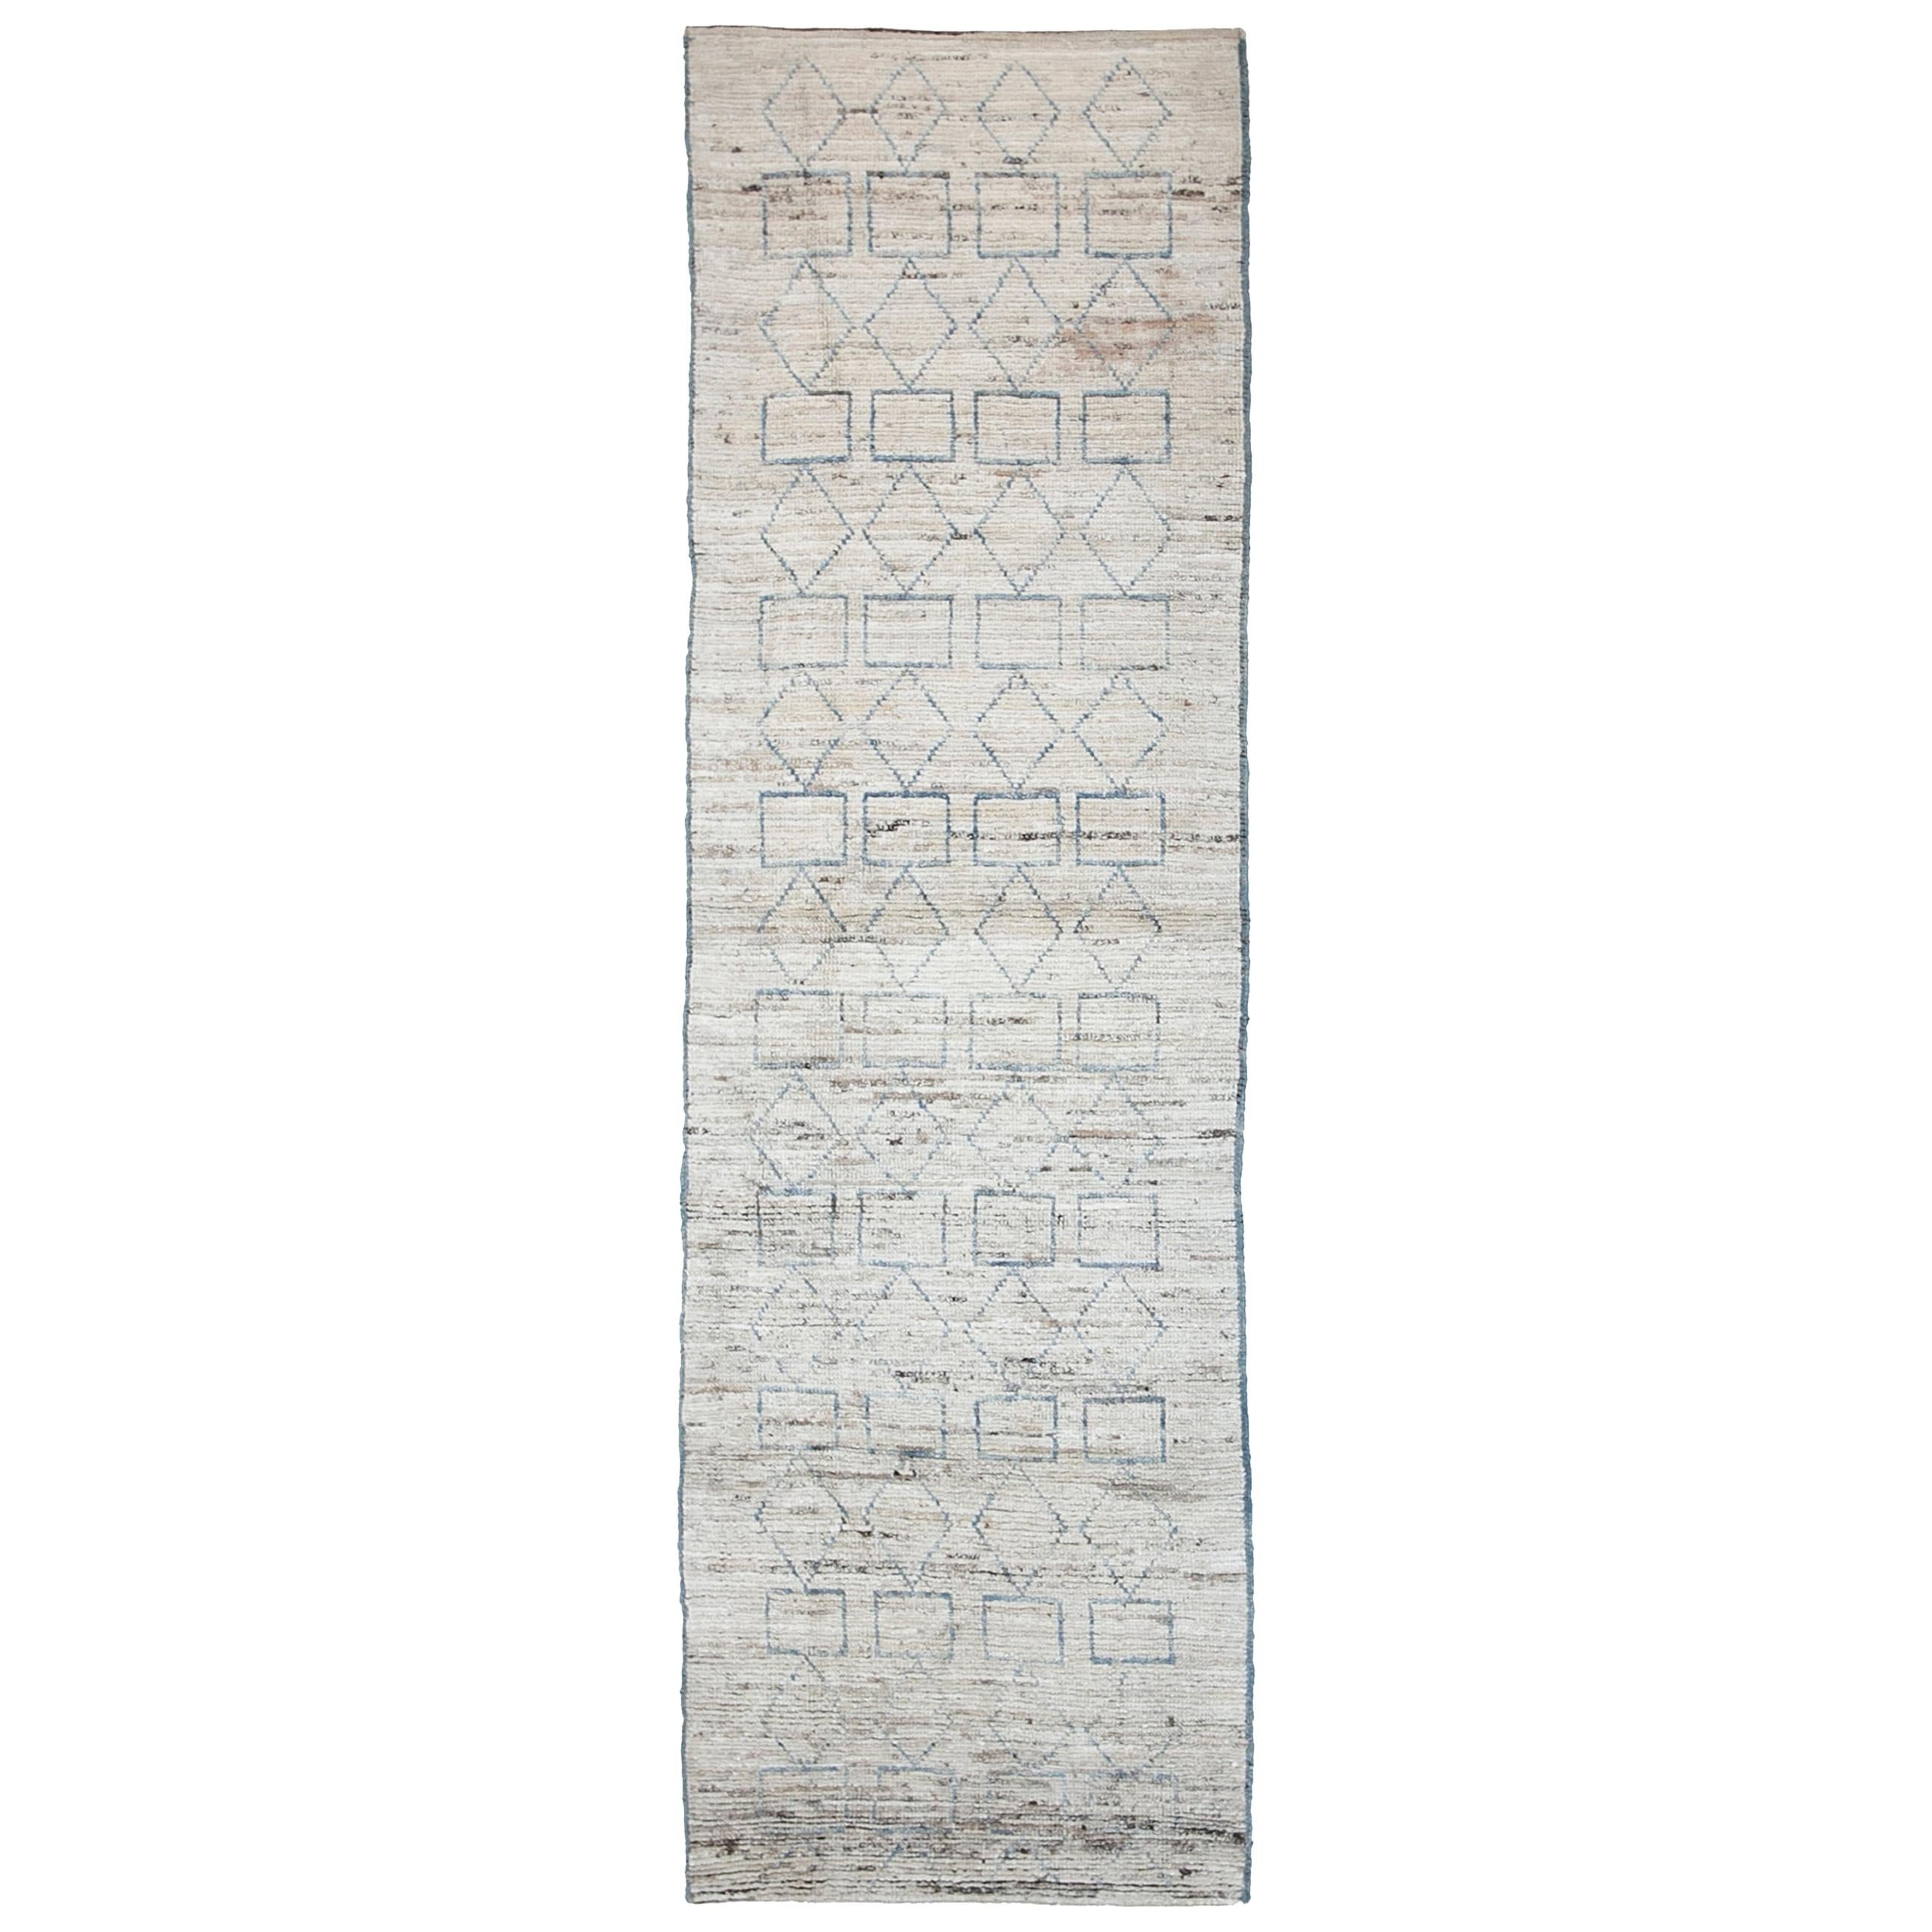 Nazmiyal Collection Berber Design Modern Moroccan Style Rug 2ft 8 in x 9ft 8 in